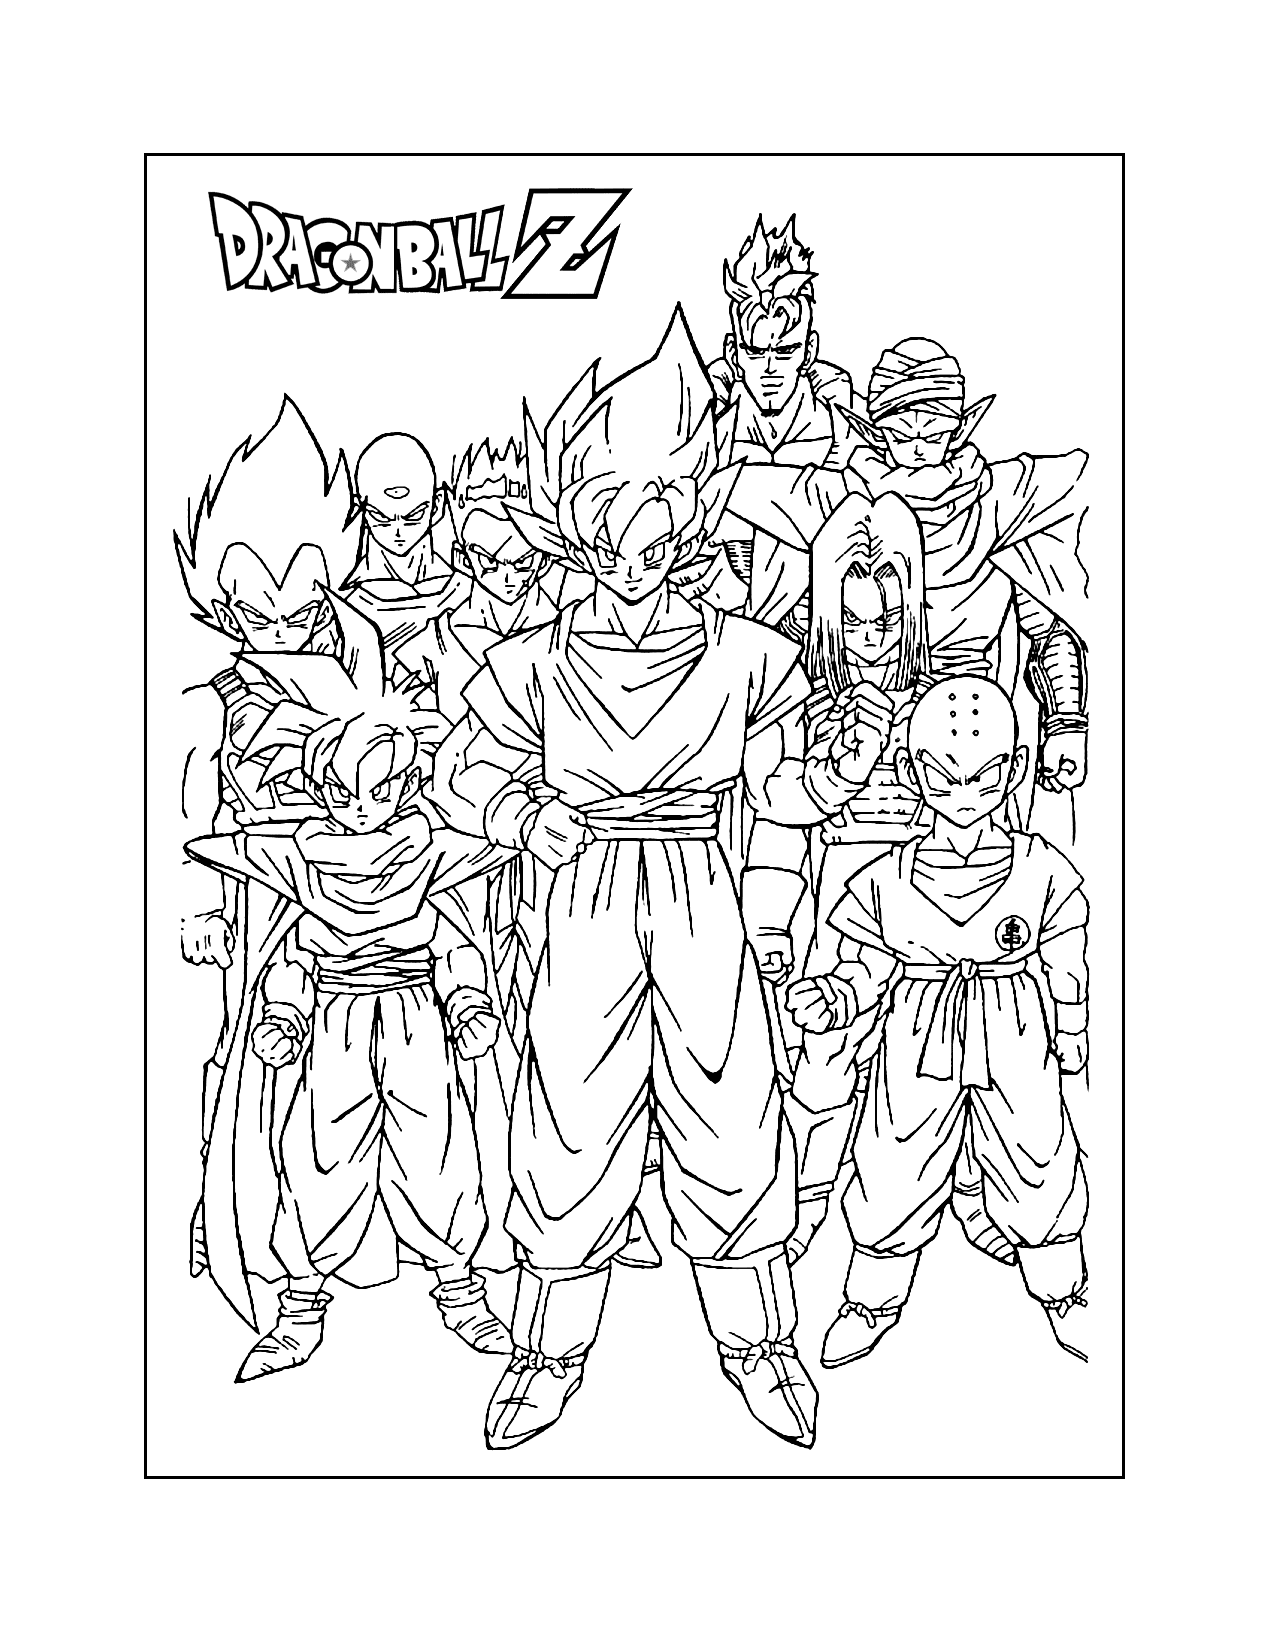 Dragonball Z Coloring Pages